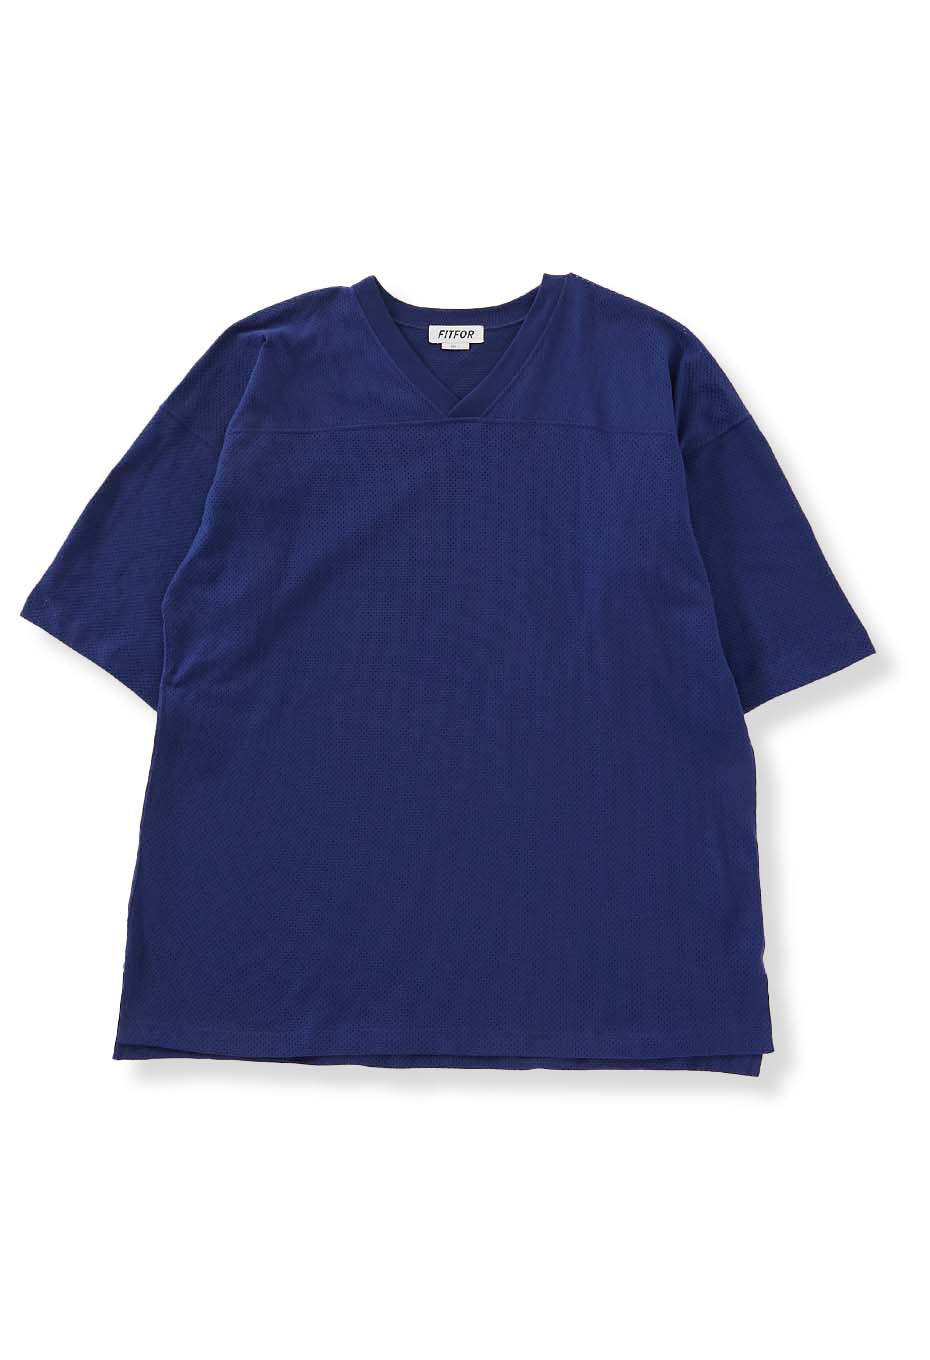 FIT FOR mesh football T-shirts